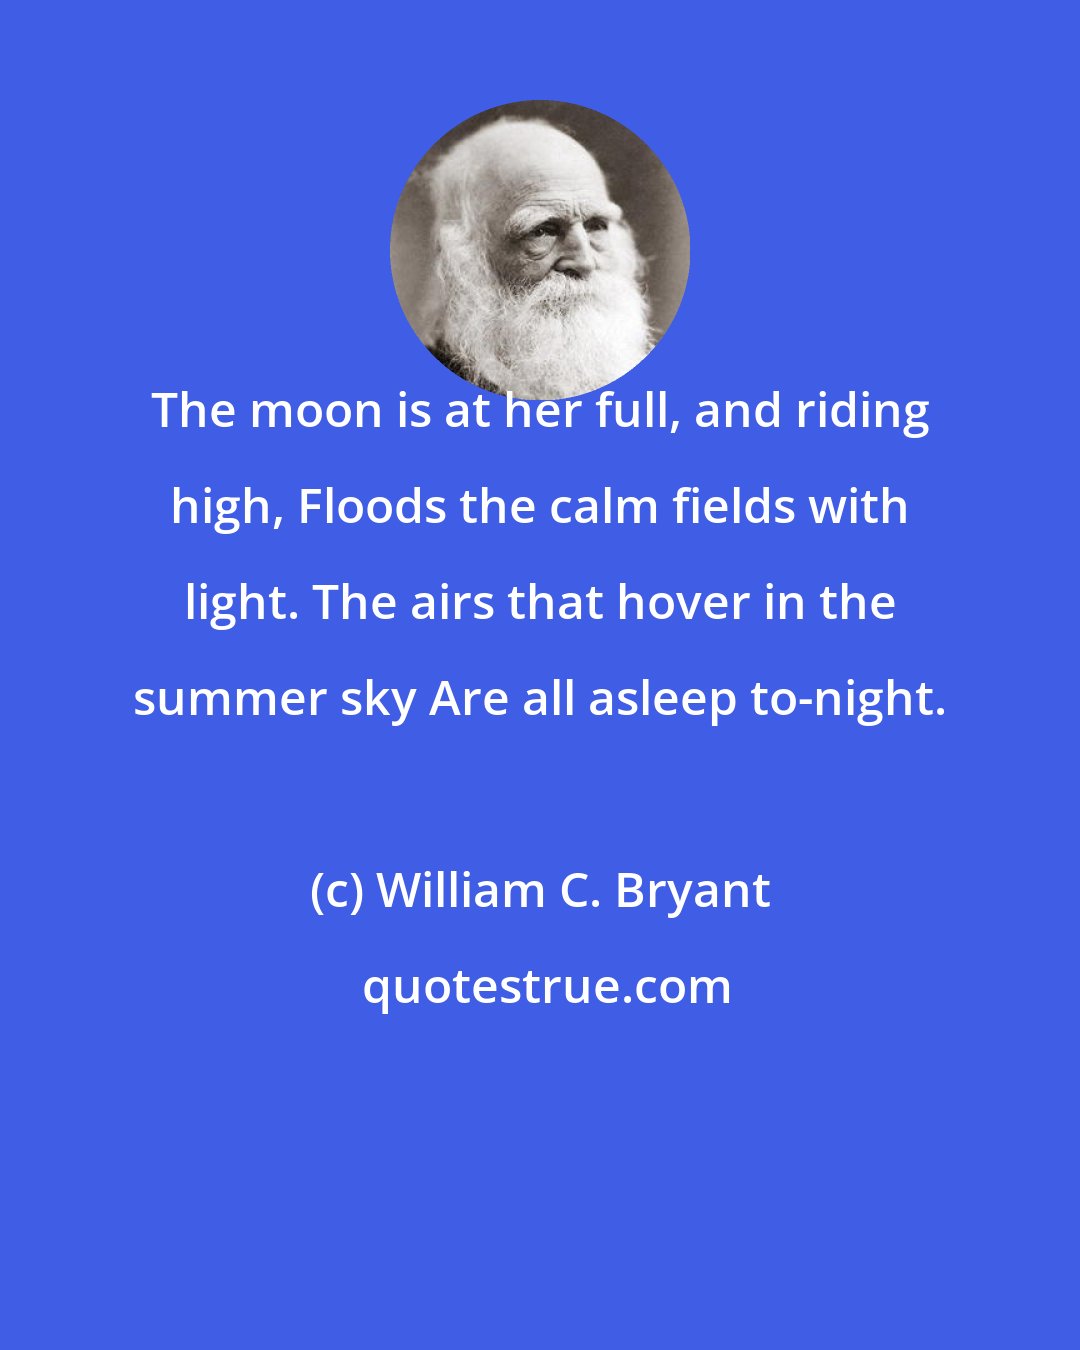 William C. Bryant: The moon is at her full, and riding high, Floods the calm fields with light. The airs that hover in the summer sky Are all asleep to-night.